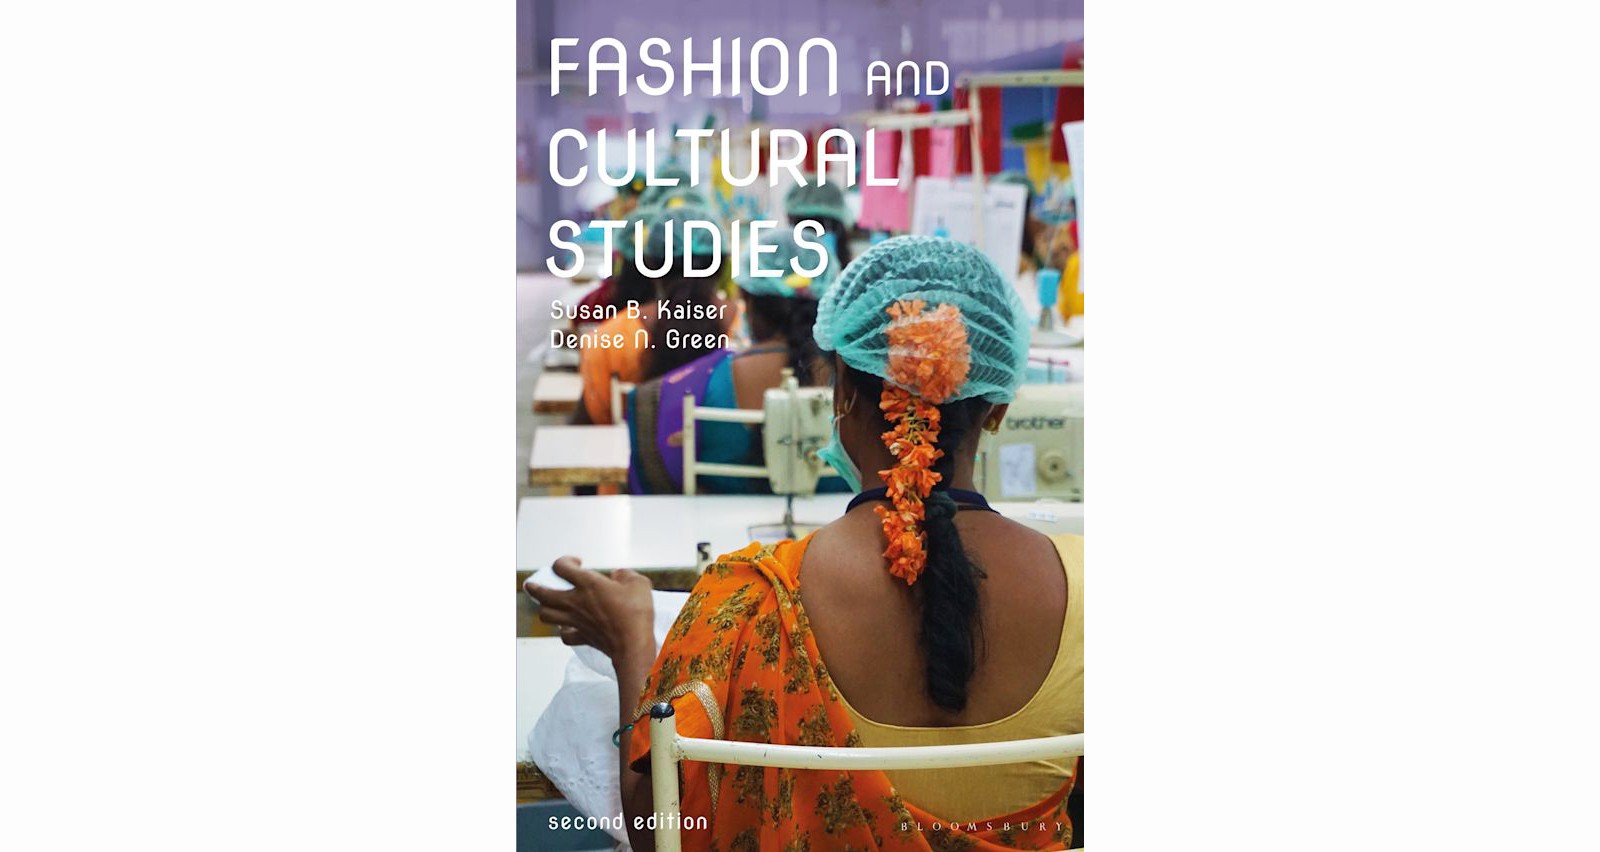 Fashion and Cultural Studies book cover